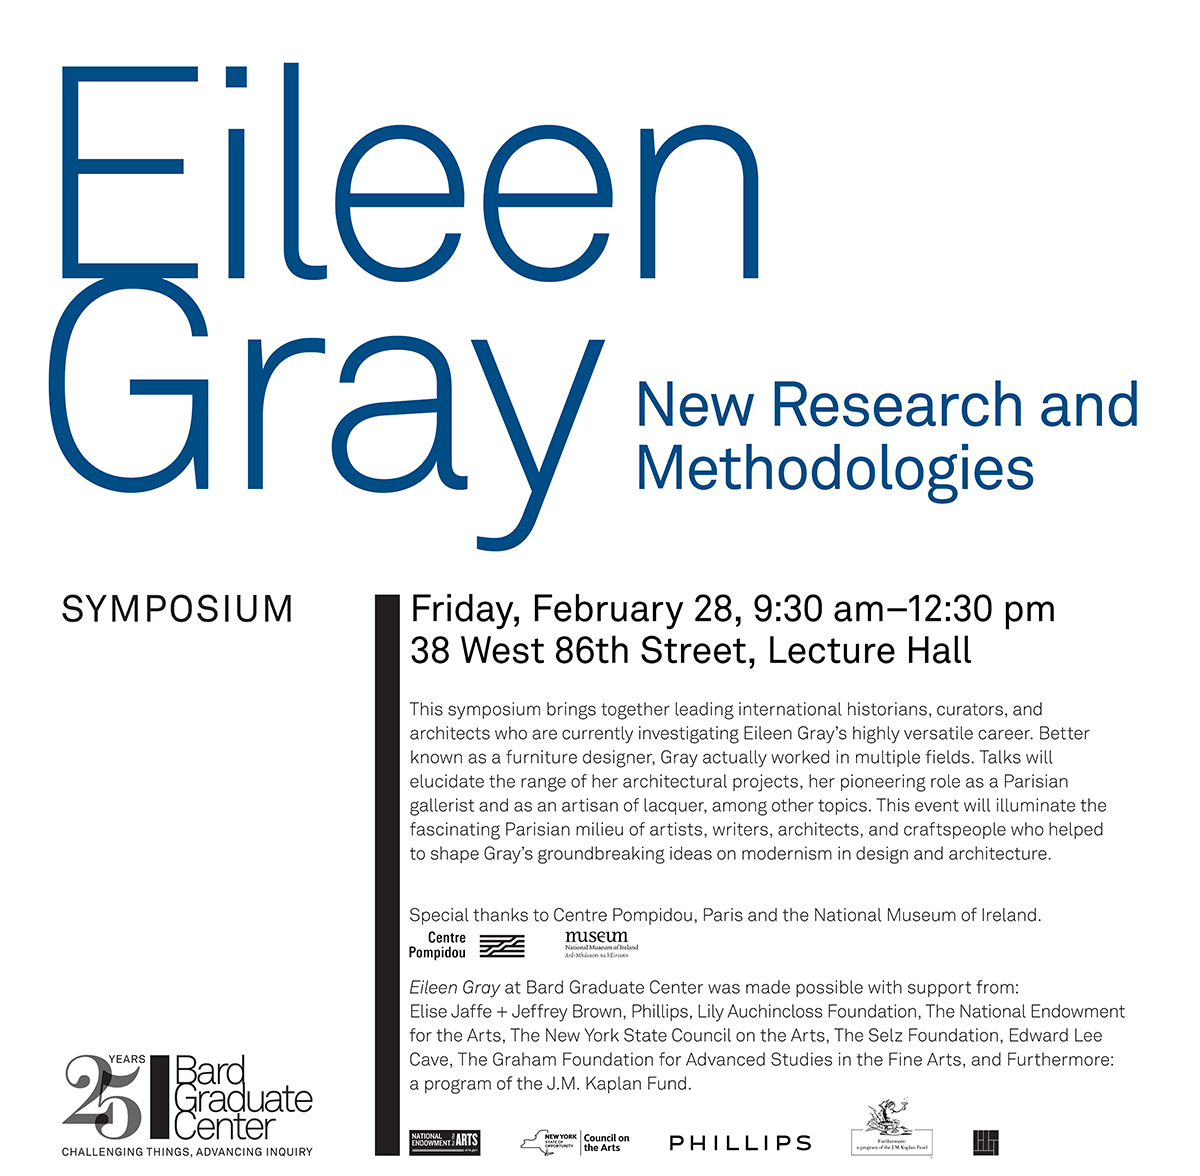 Flyer for "Eileen Gray: New Research and Methodologies" symposium. Event title in blue above a description of the event on Friday, Febraury 28, 9:30am–12:30pm at 38 West 86th Street, Lecture Hall at Bard Graduate Center.